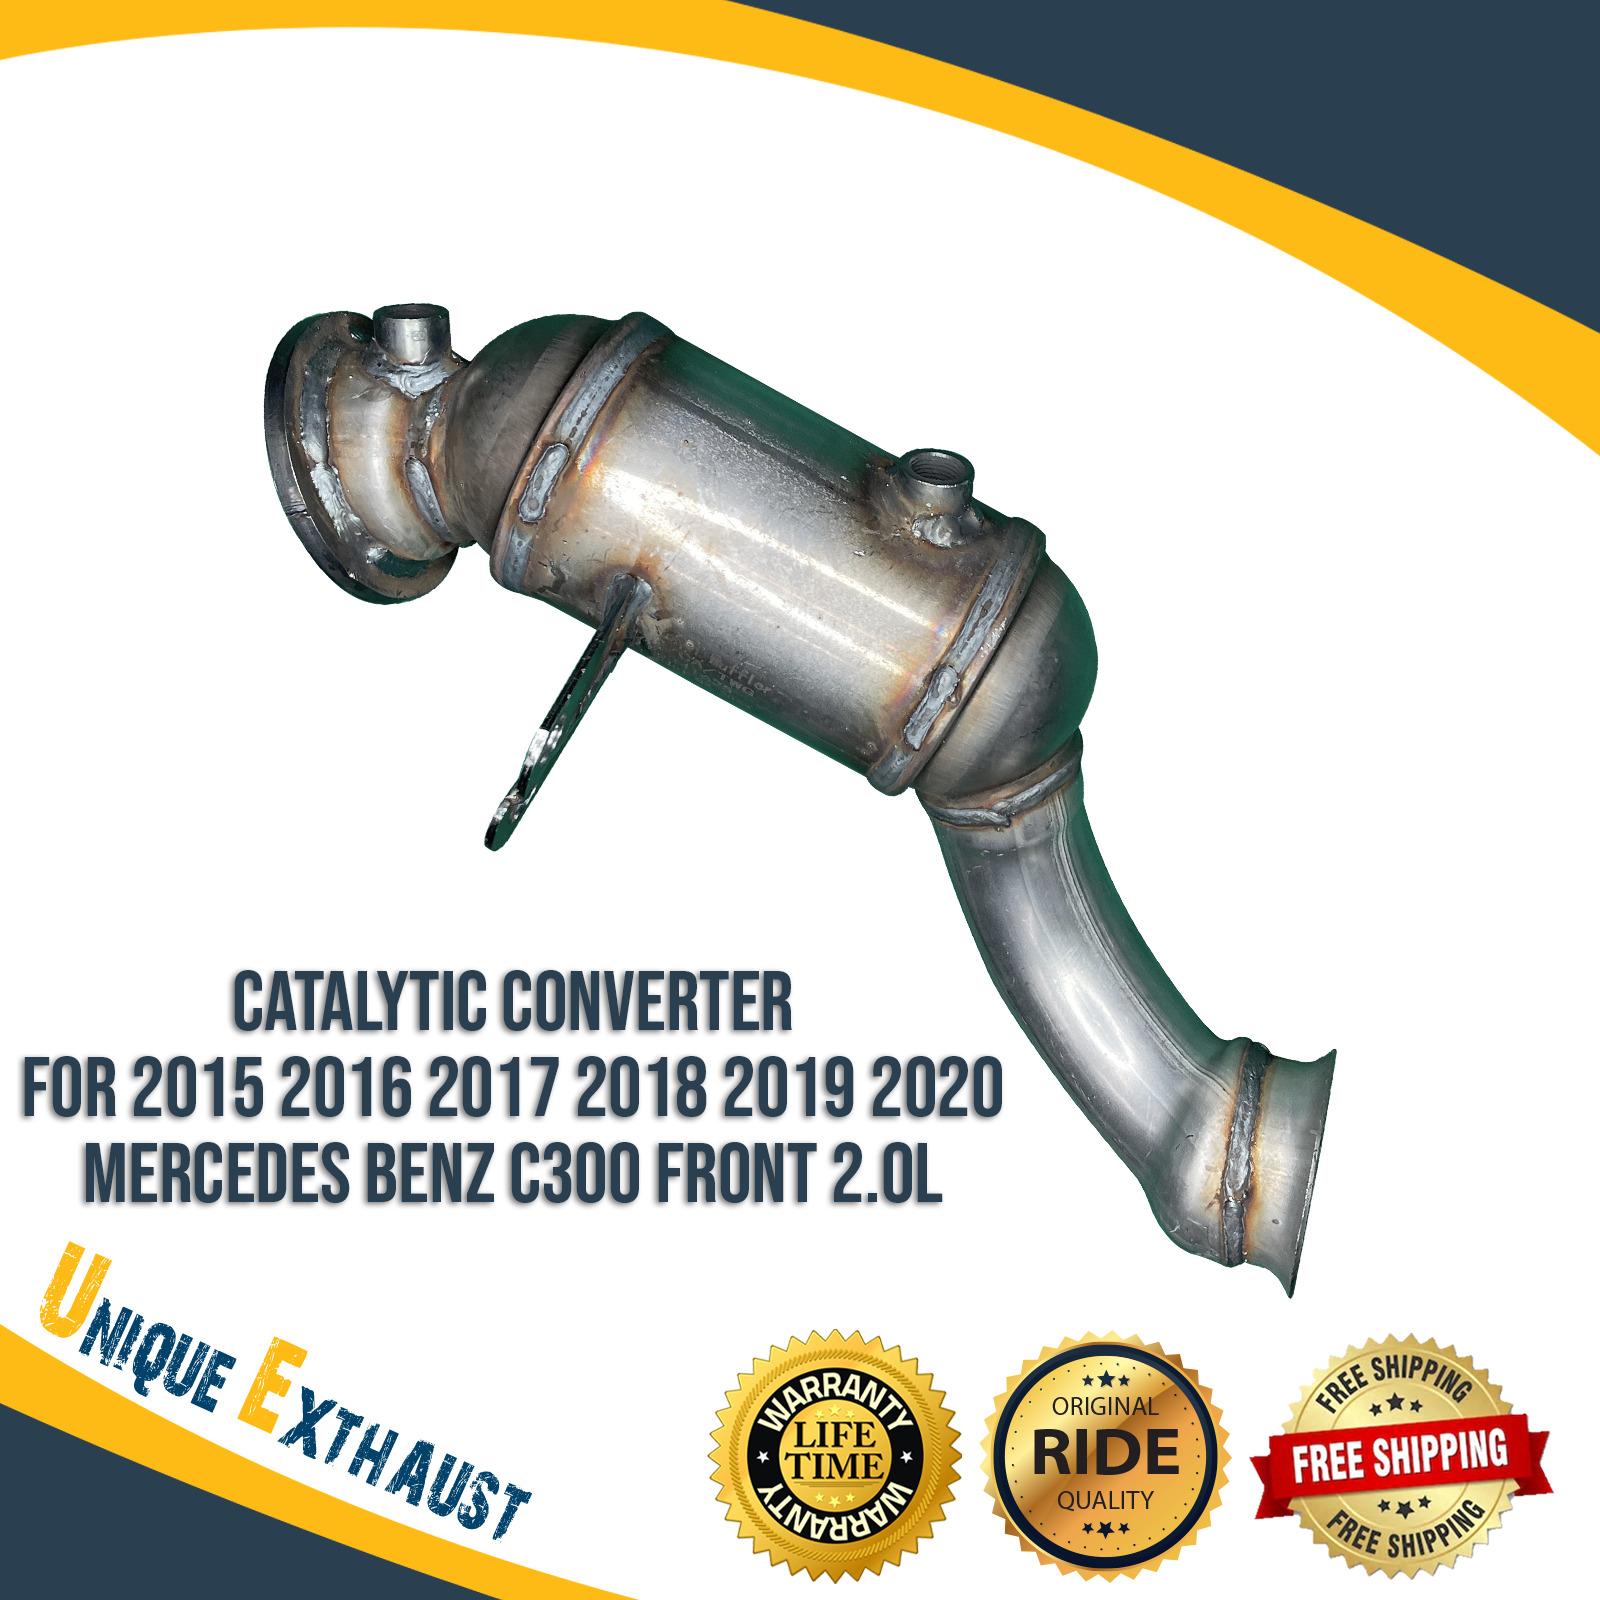 Catalytic Converter for 2015-2020 Mercedes Benz C300 Front 2.0L In Stock Ready